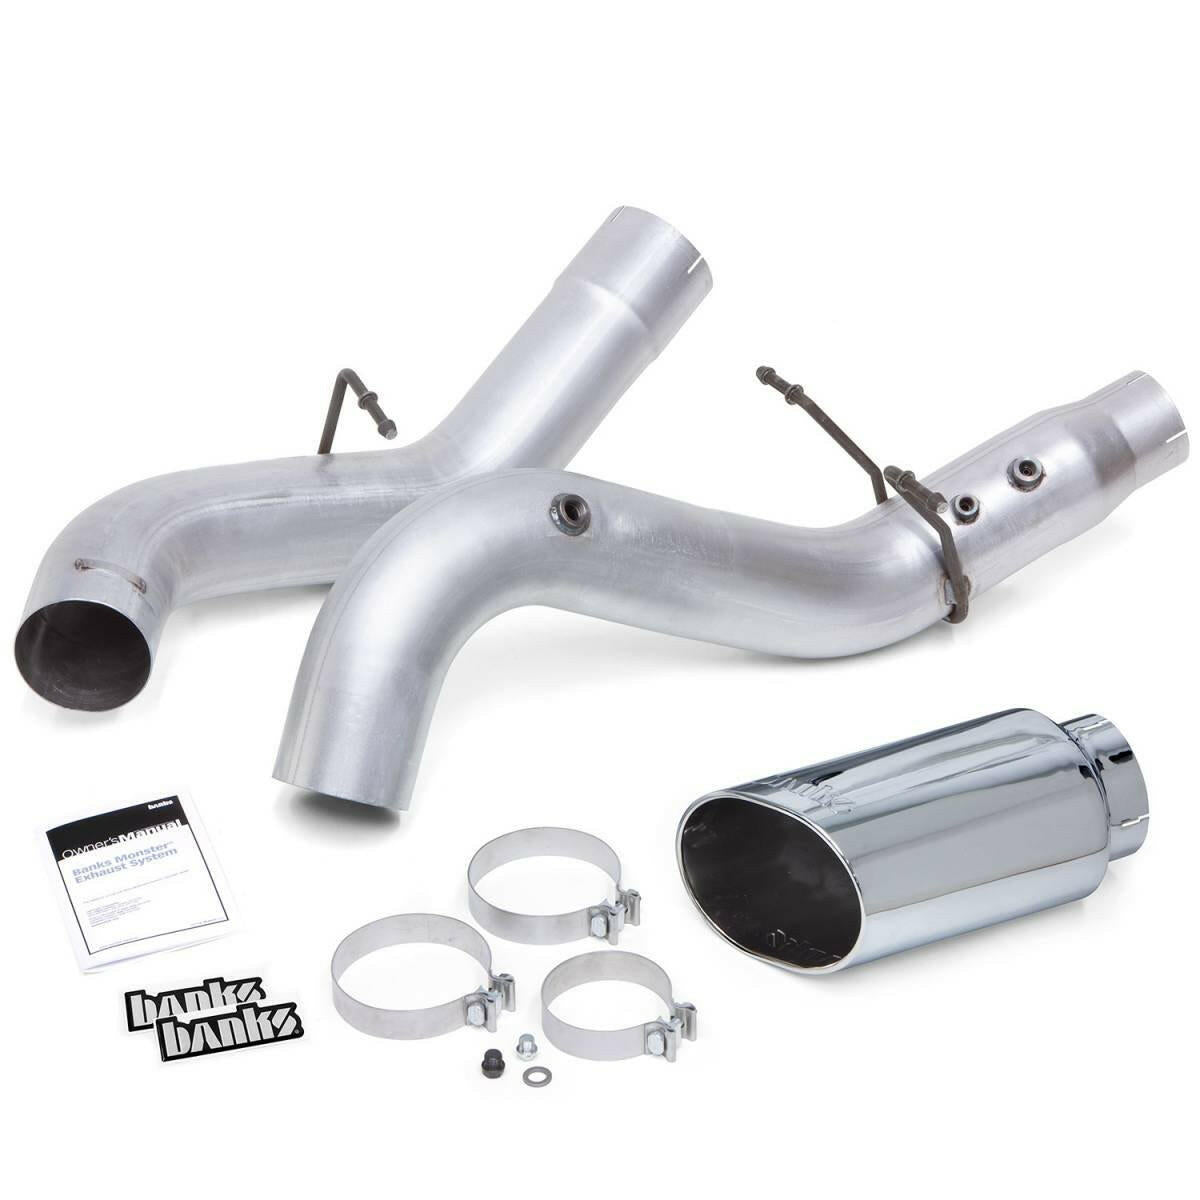 Banks Power Monster Exhaust System 5-inch Single Exit Chrome Tip 20-23 Chevy/GMC 2500/3500 Duramax 6.6L L5P Banks Power.